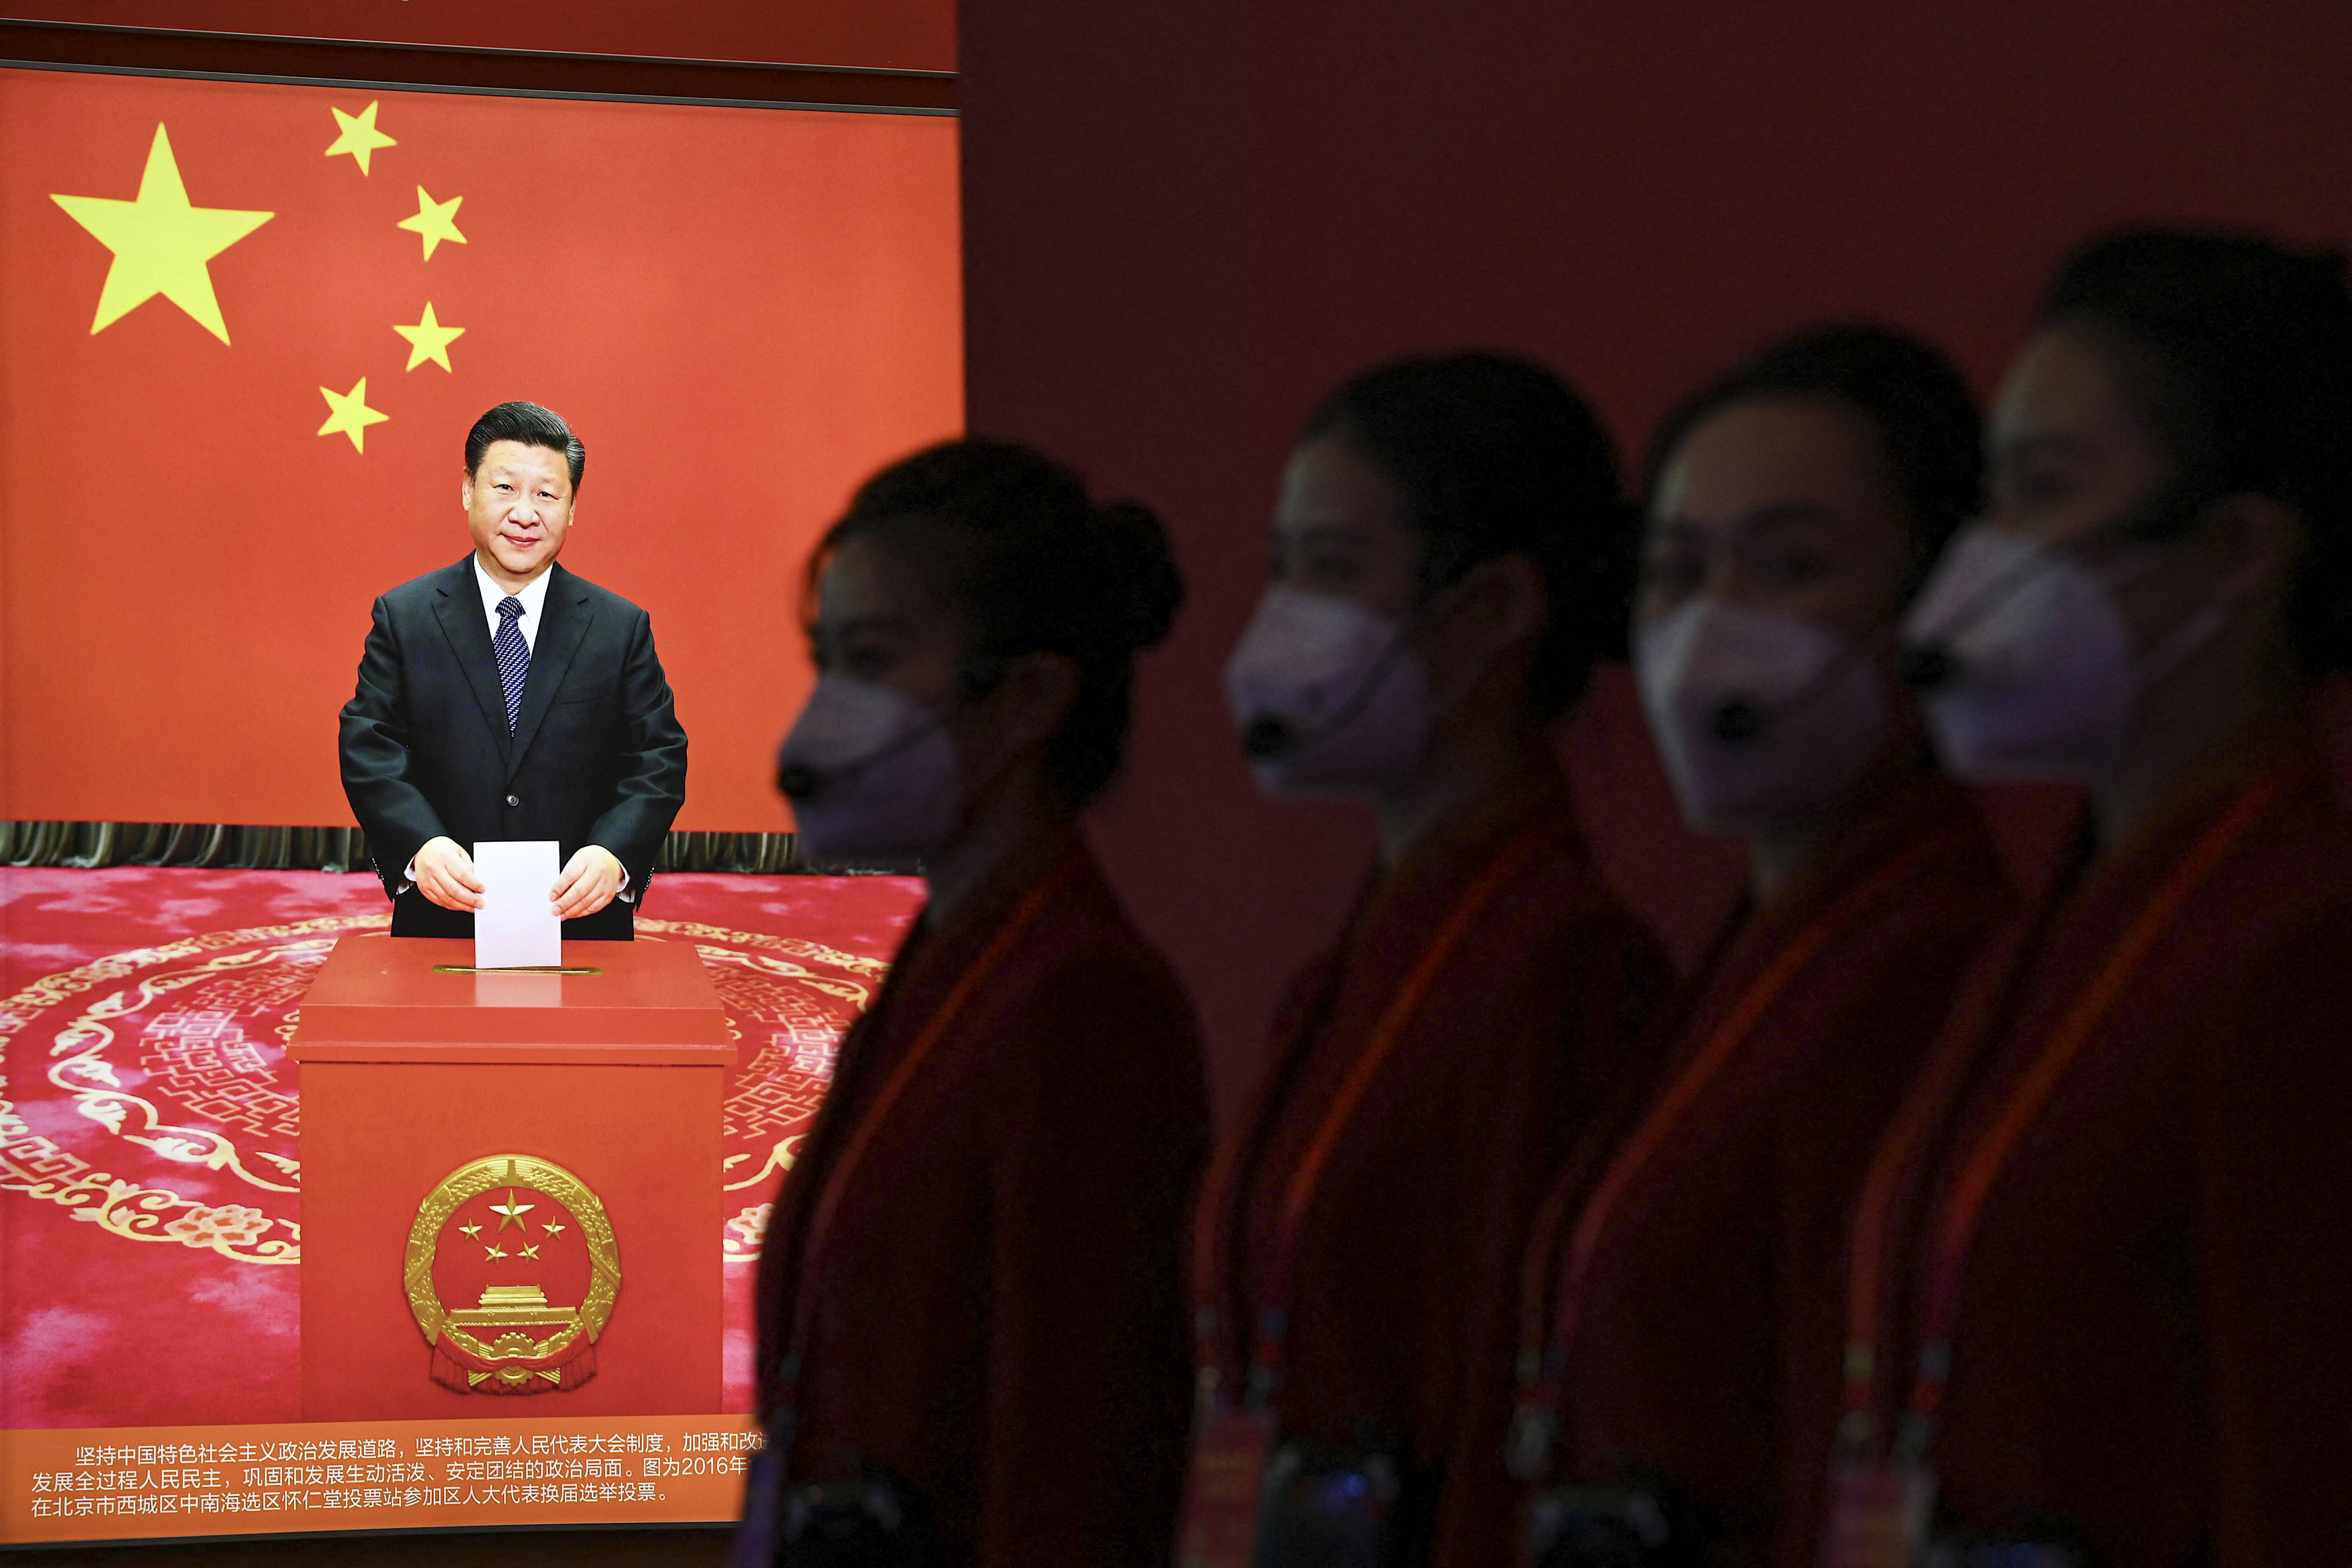 Attendants stand near a picture of Chinese President Xi Jinping at the Beijing Exhibition Centre, ahead of the 20th Communist Party Congress. Photo: AFP